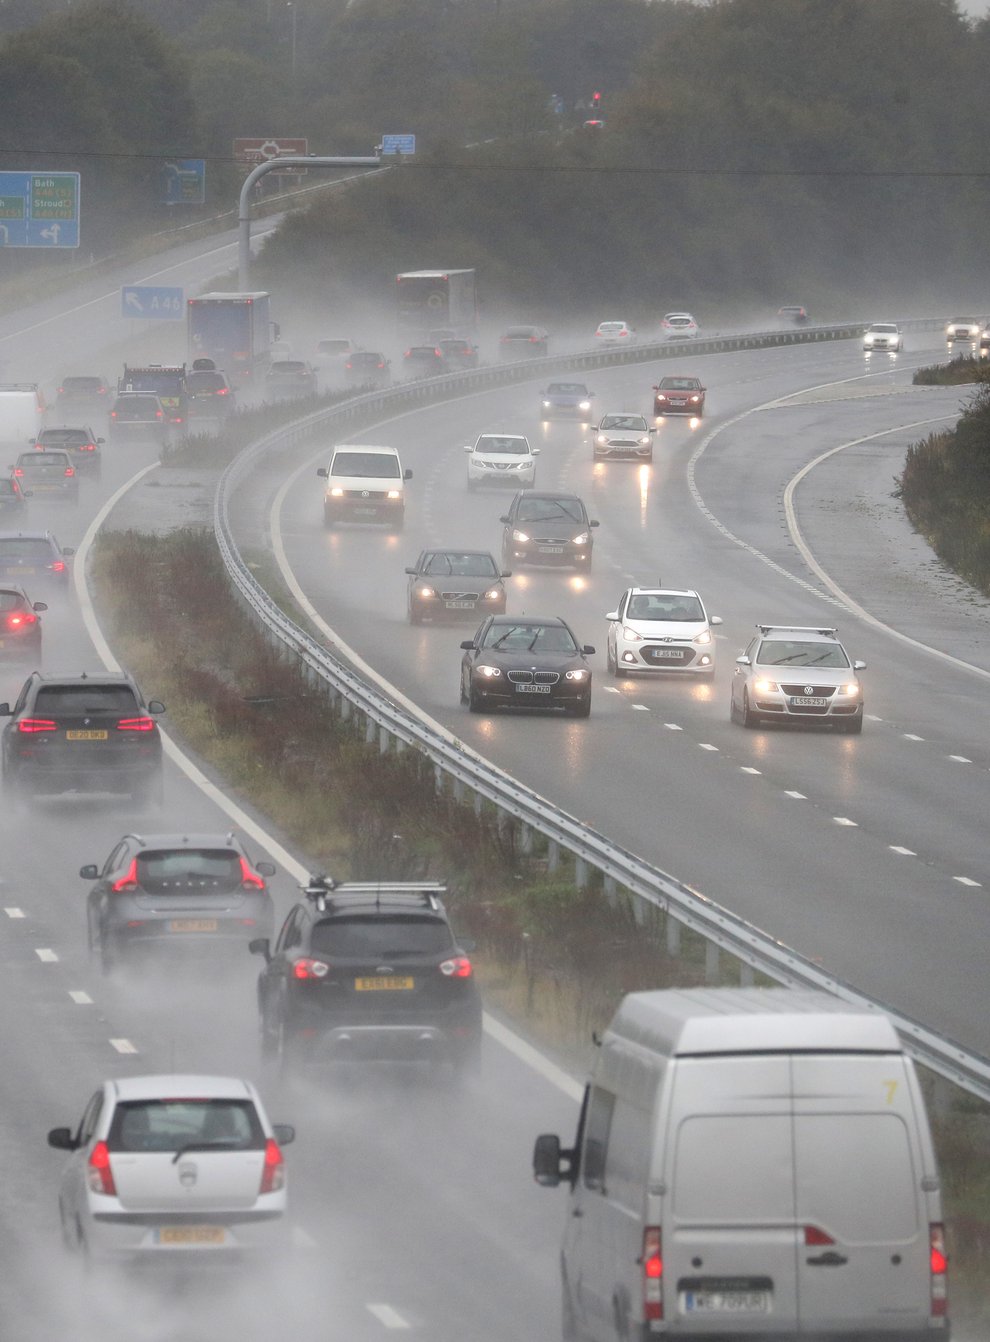 Cars make their way along the M4 motorway as heavy rain lashes the UK